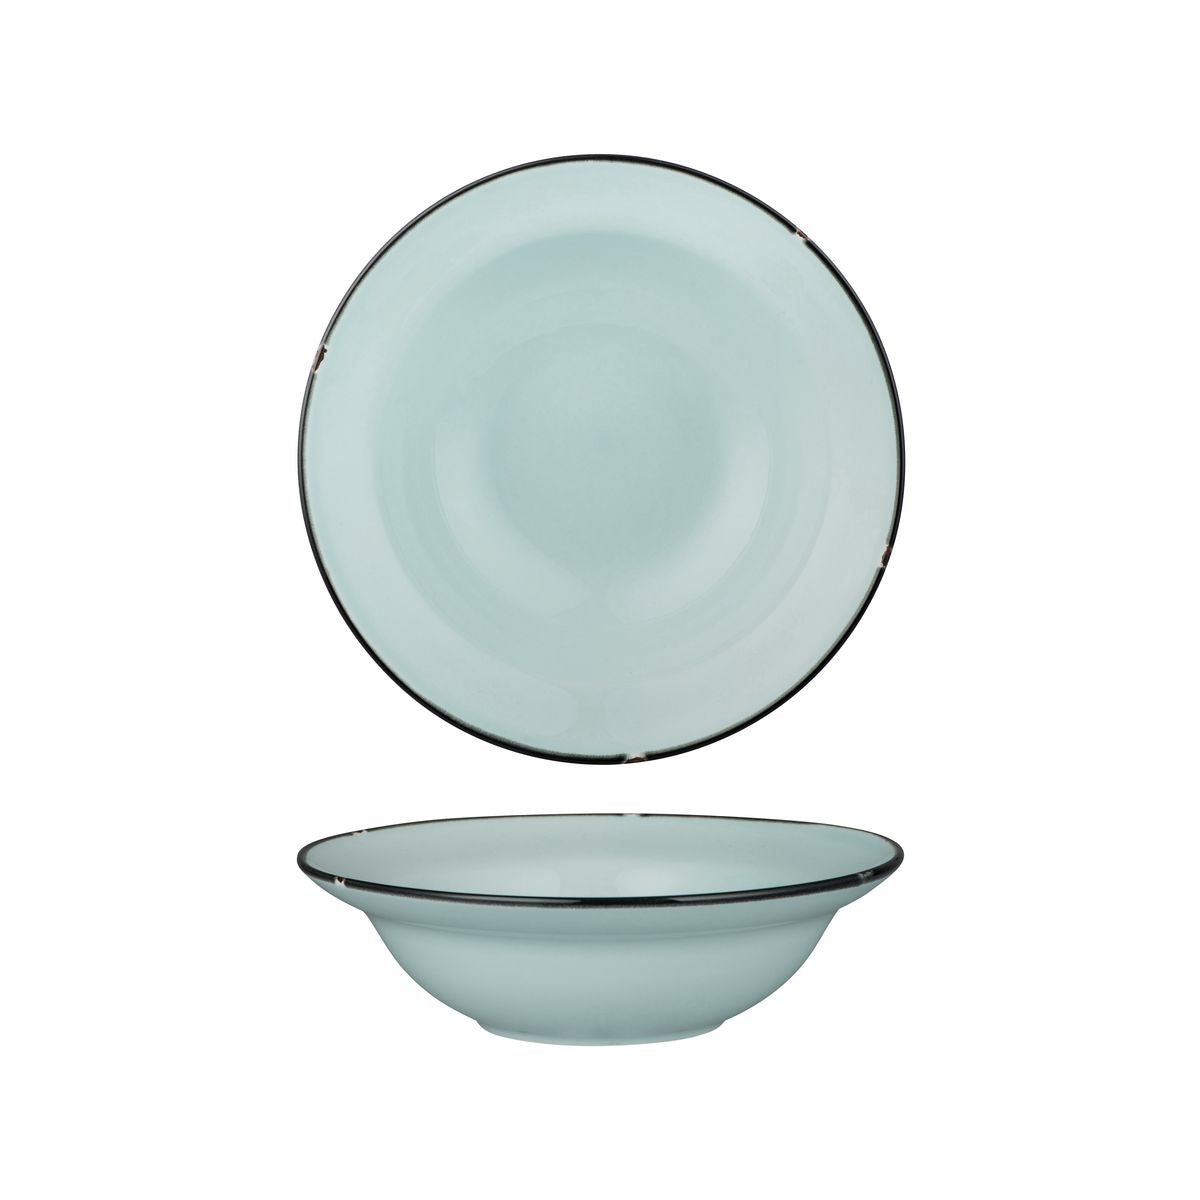 Deep Bowl Plate - 220mm, Tintin Blue & Black from Luzerne. made out of Ceramic and sold in boxes of 12. Hospitality quality at wholesale price with The Flying Fork! 